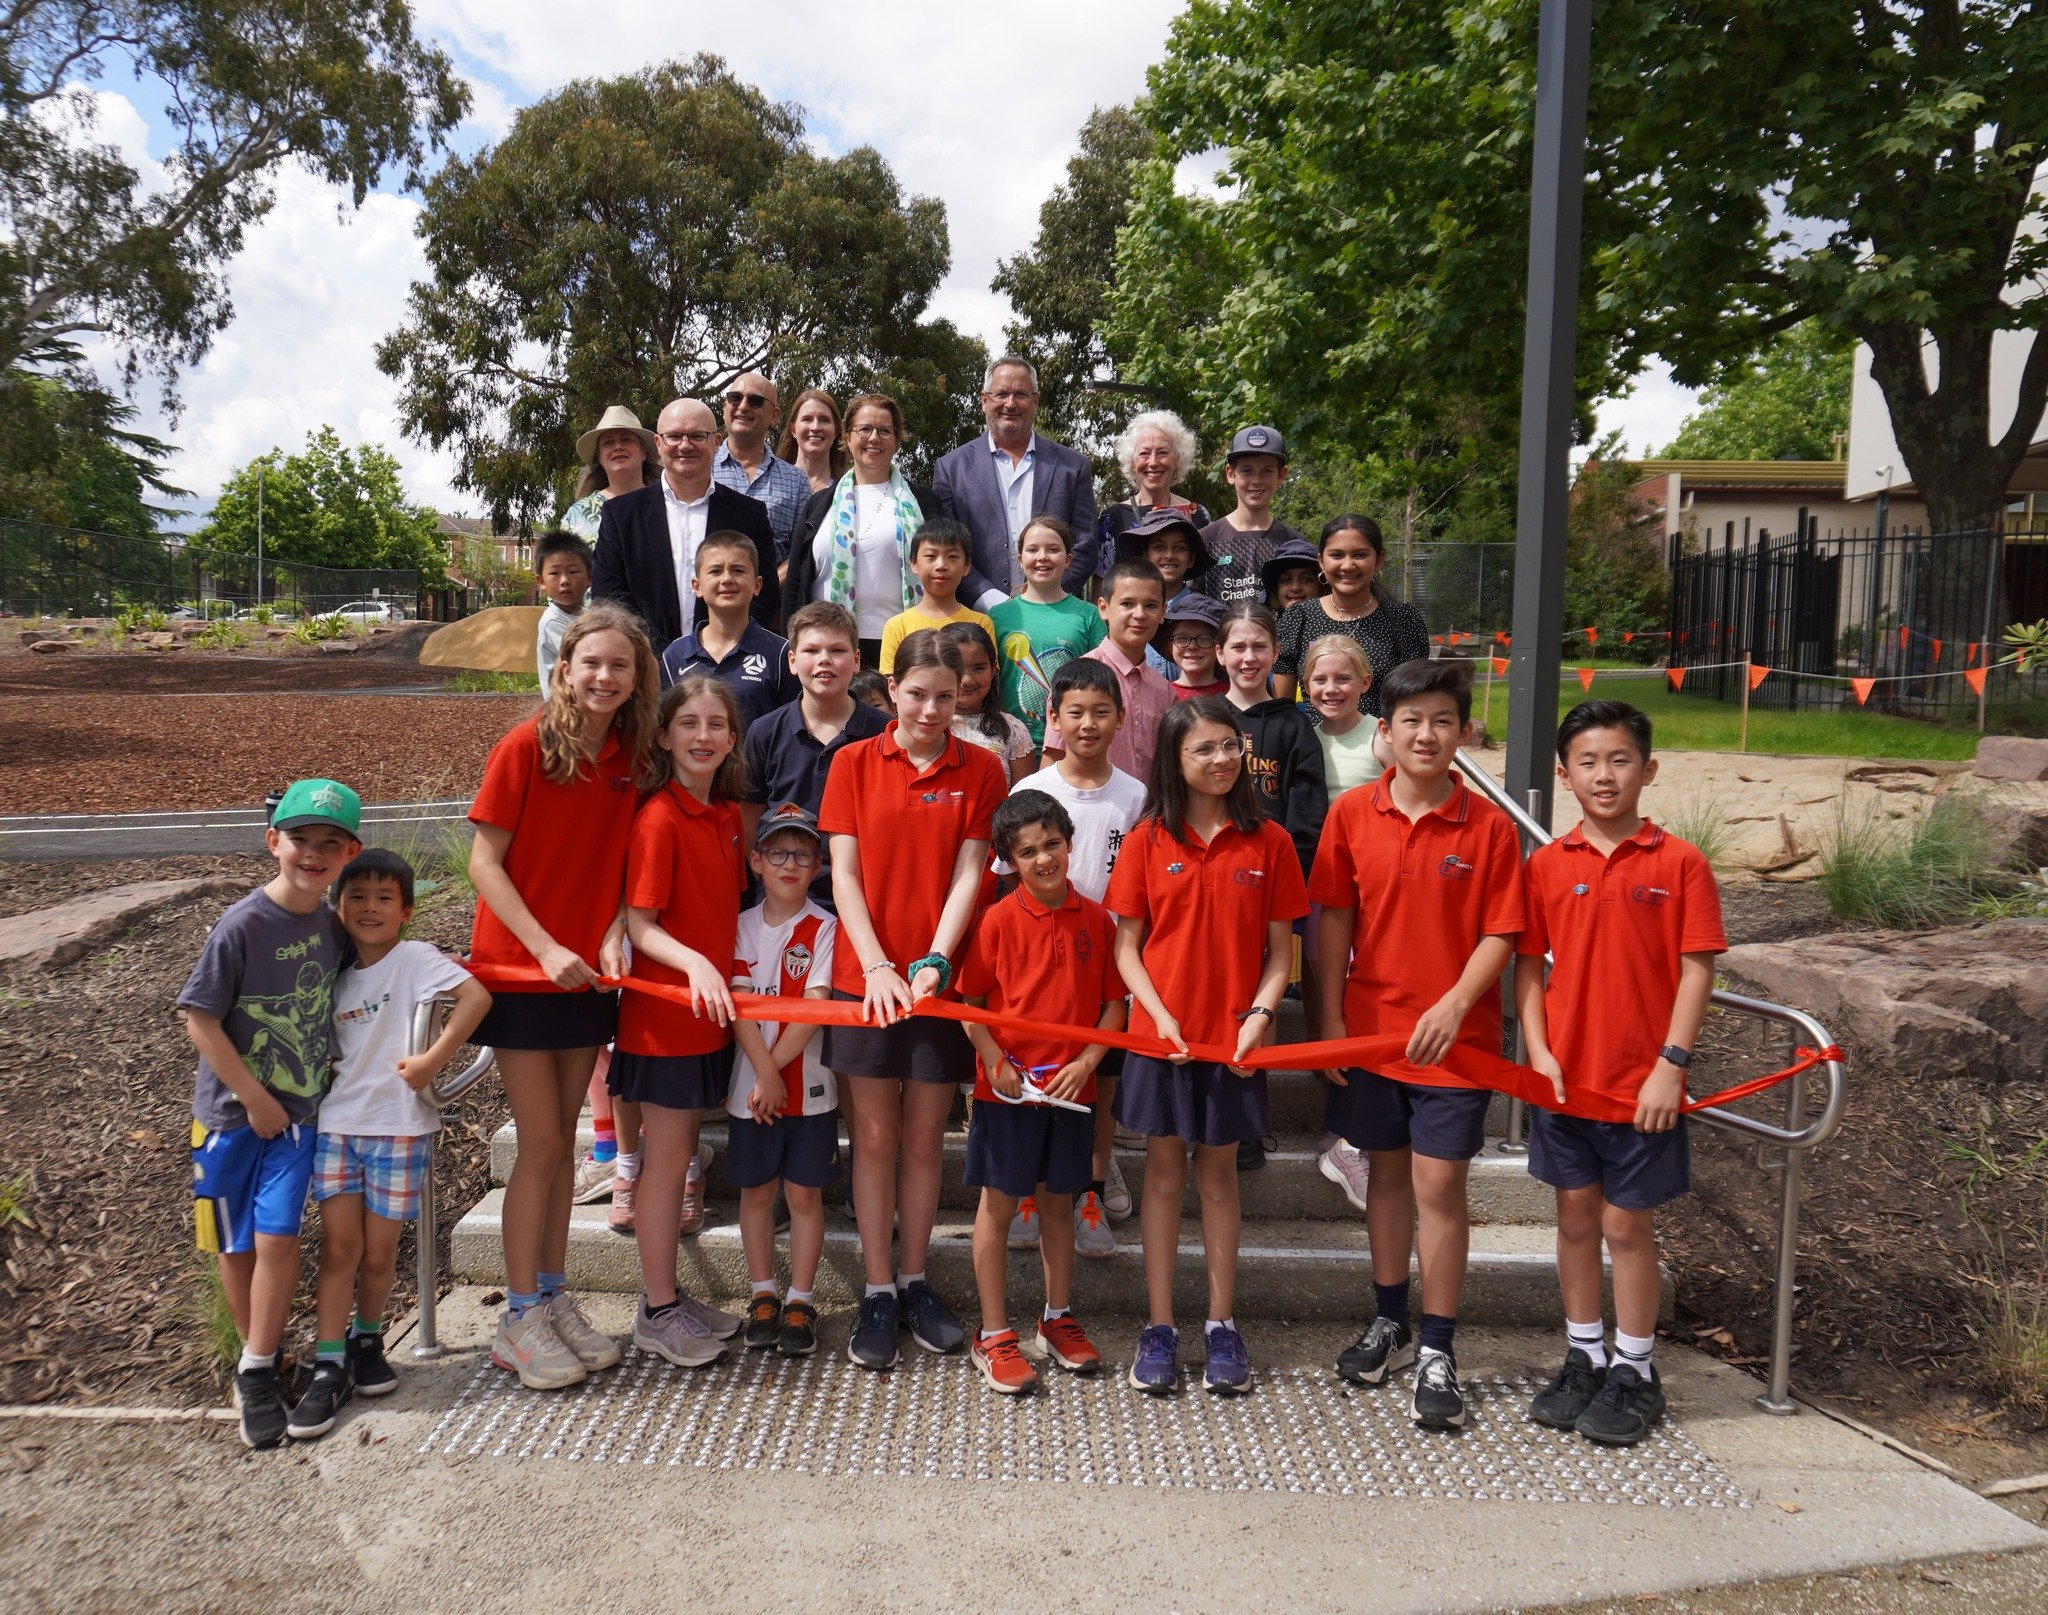 After years of work and hundreds of hours of campaigning, the community pulled through.

We transformed a car park into Camberwell Green - a park, playground, and space for all to enjoy.

And it couldn't have happened without the $1.7 million dollar 